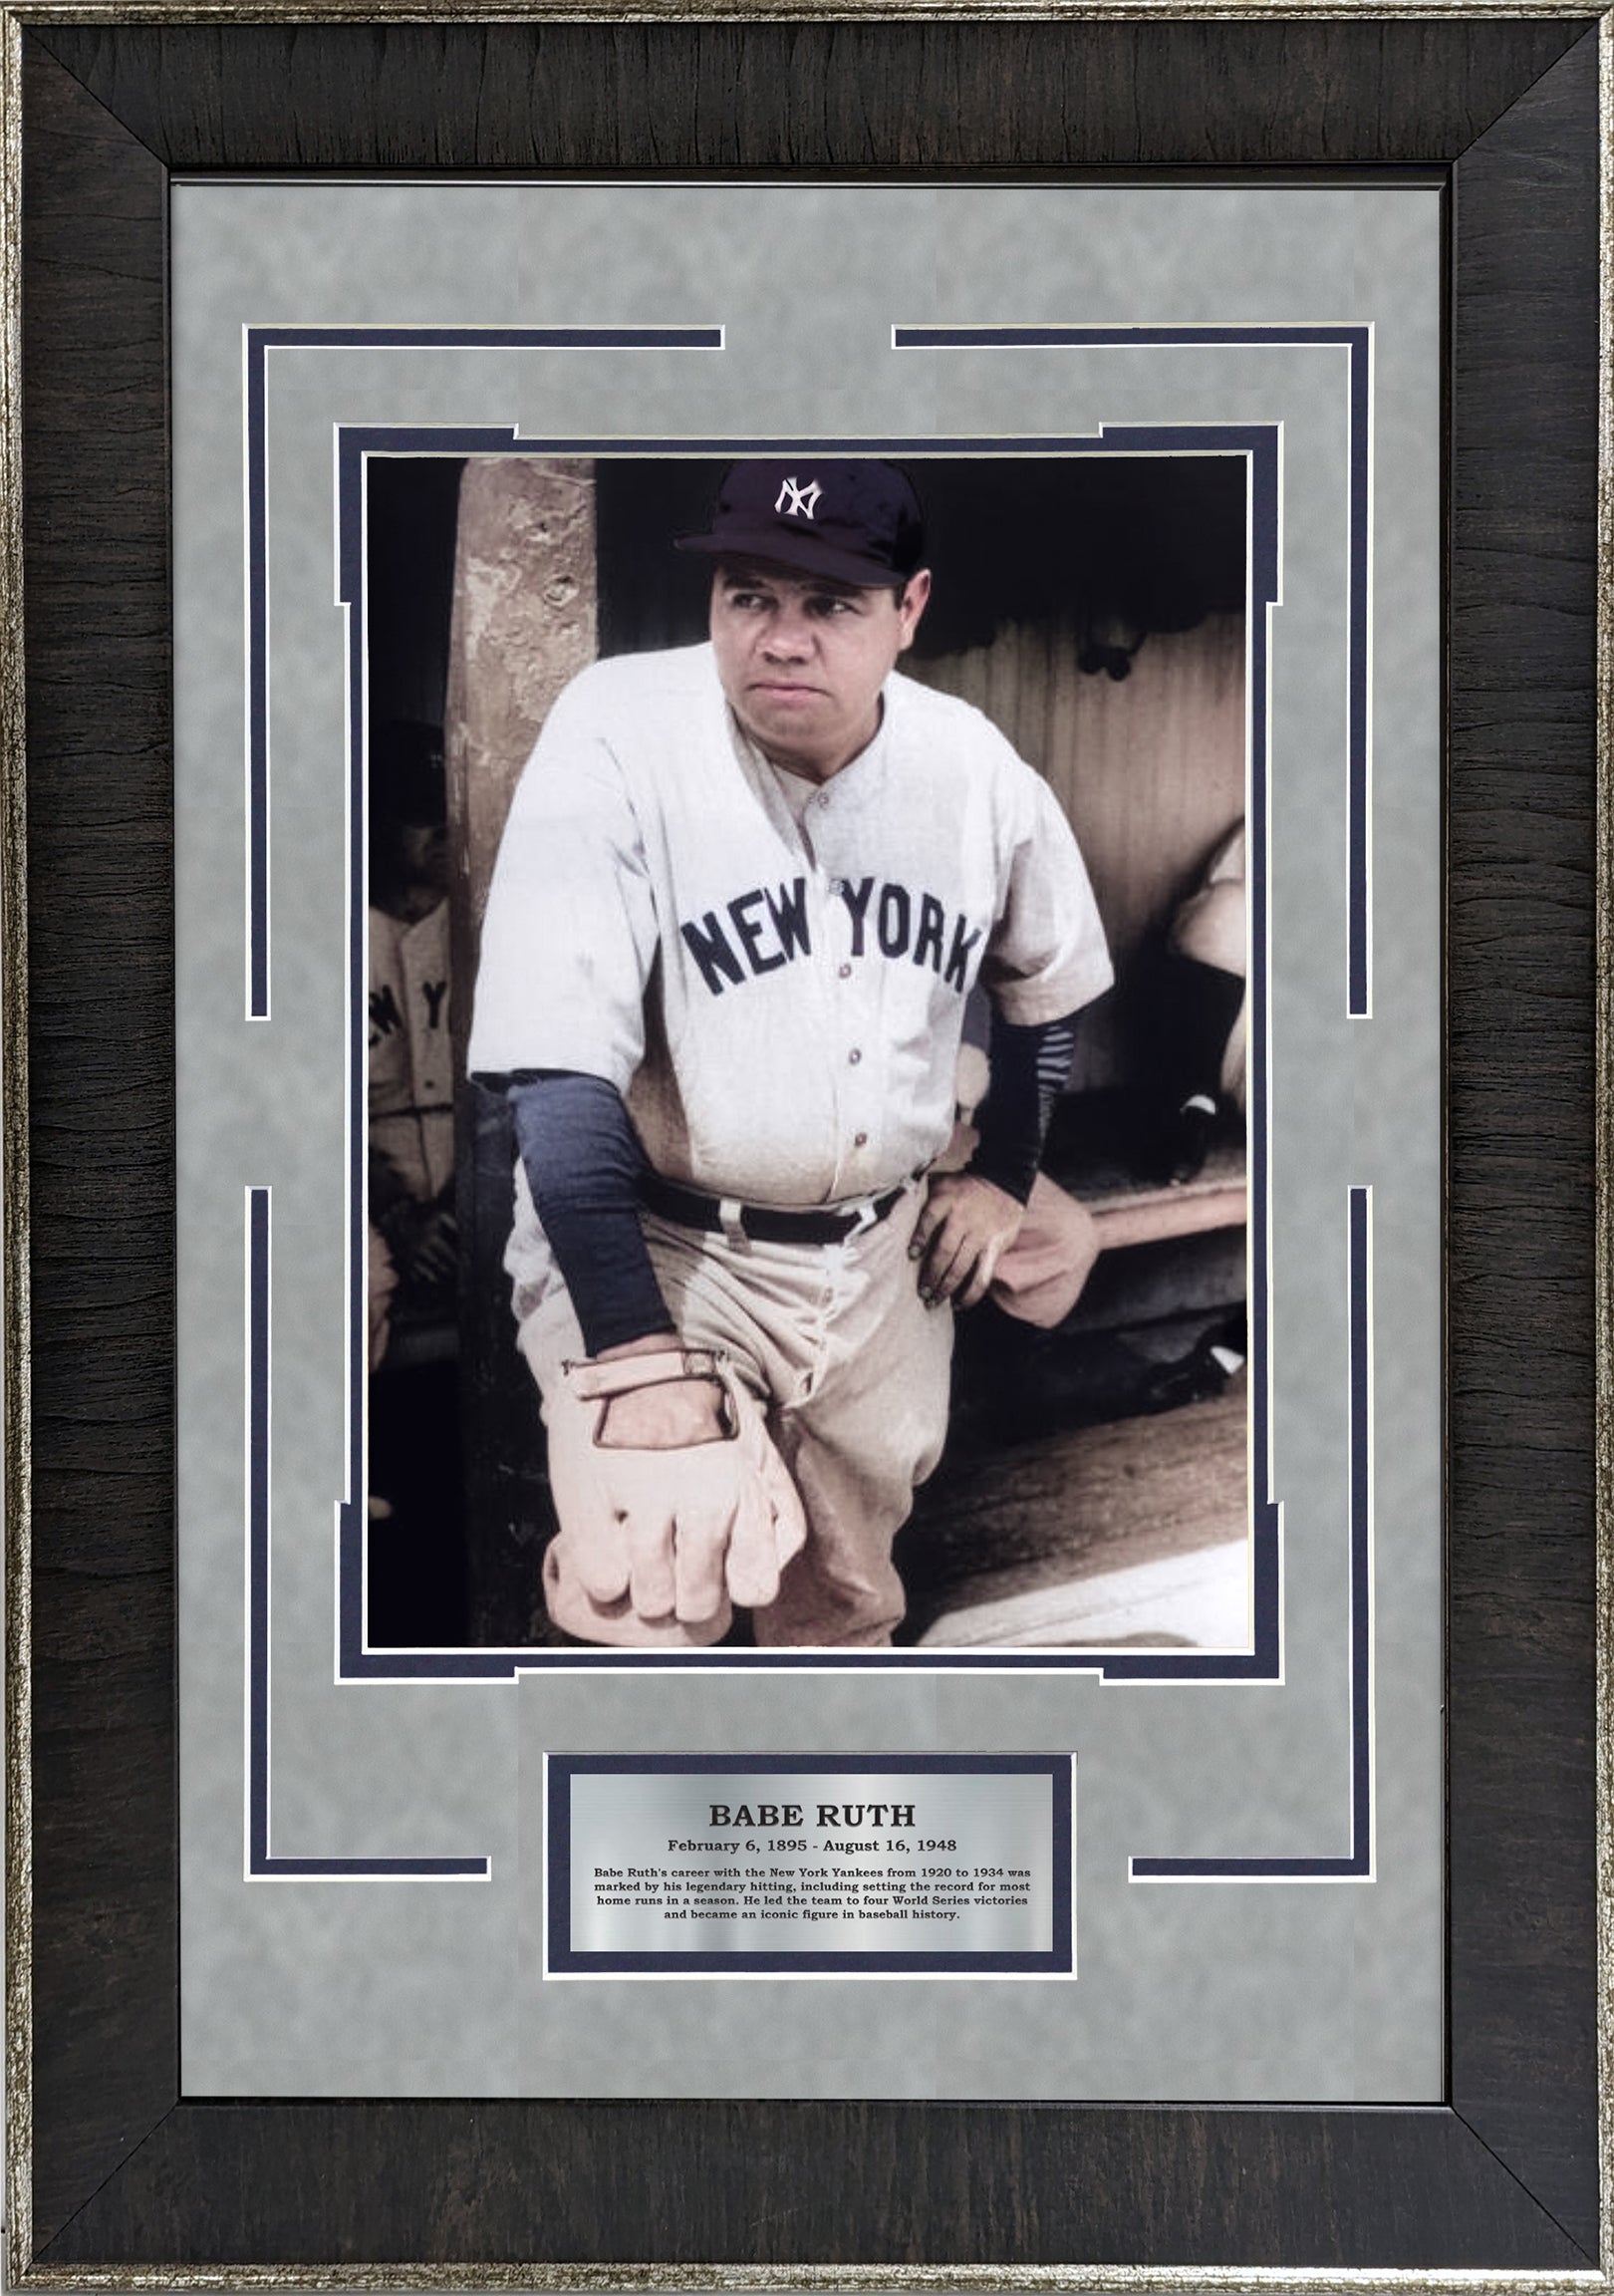 Babe Ruth - Waiting in the Dugout